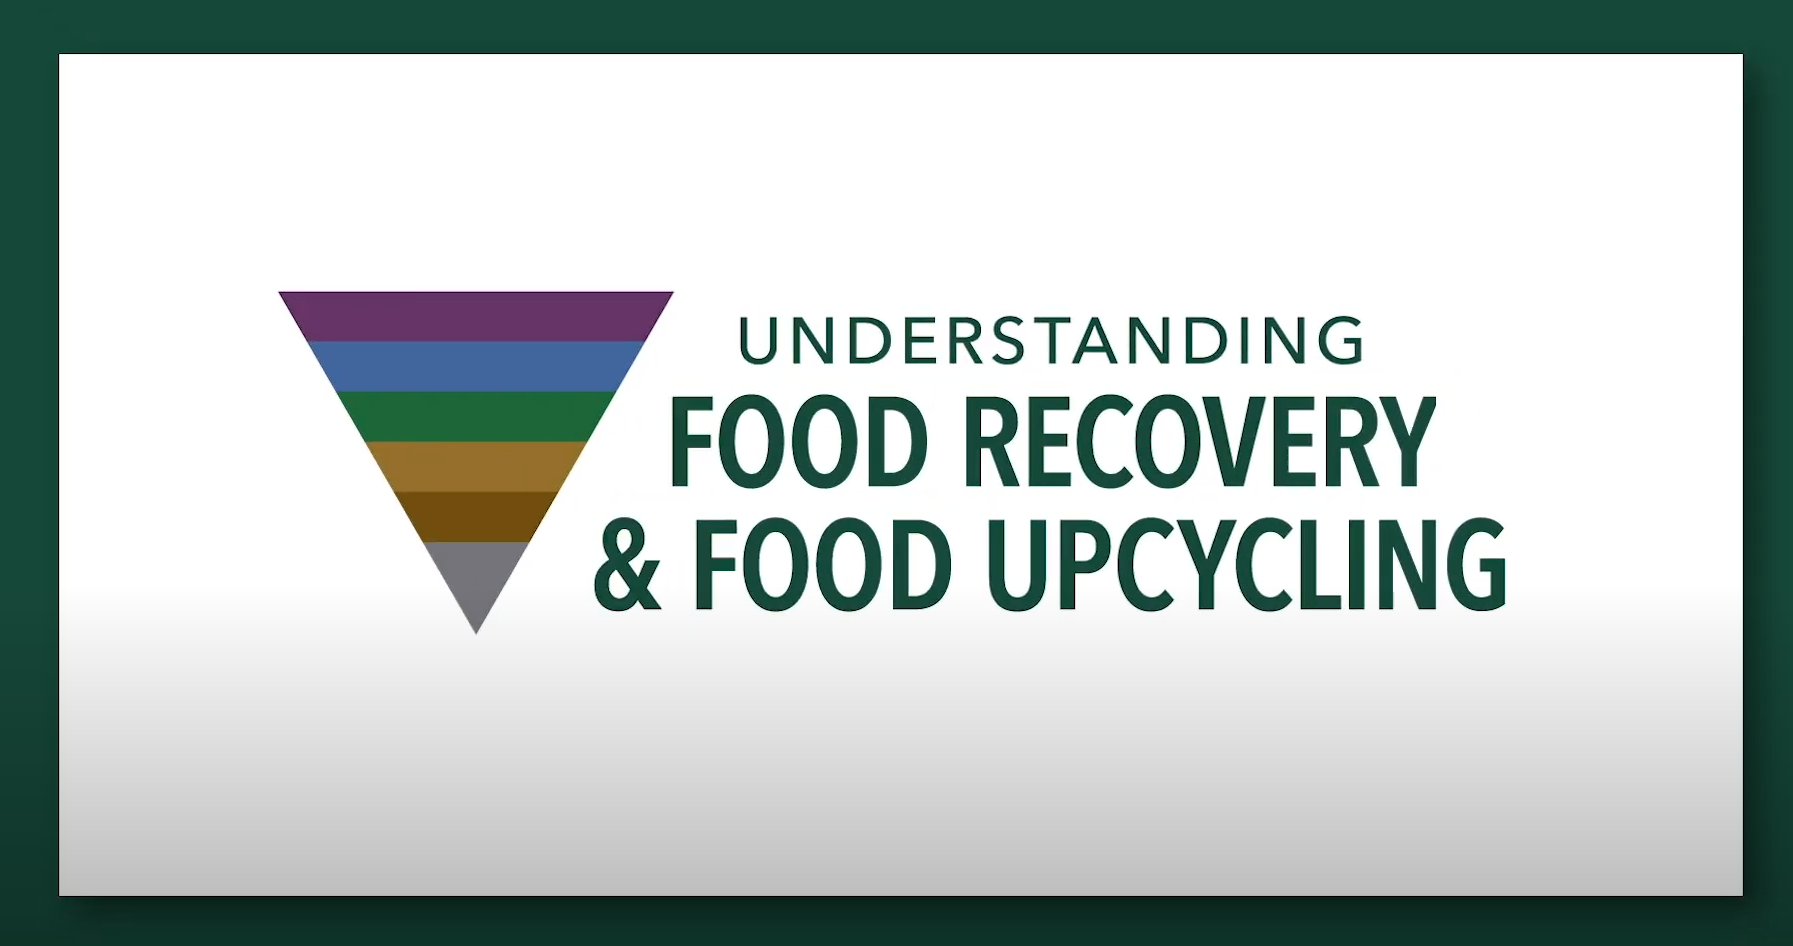 Understanding Food Recovery & Food Upcycling - courtesy of CDFA